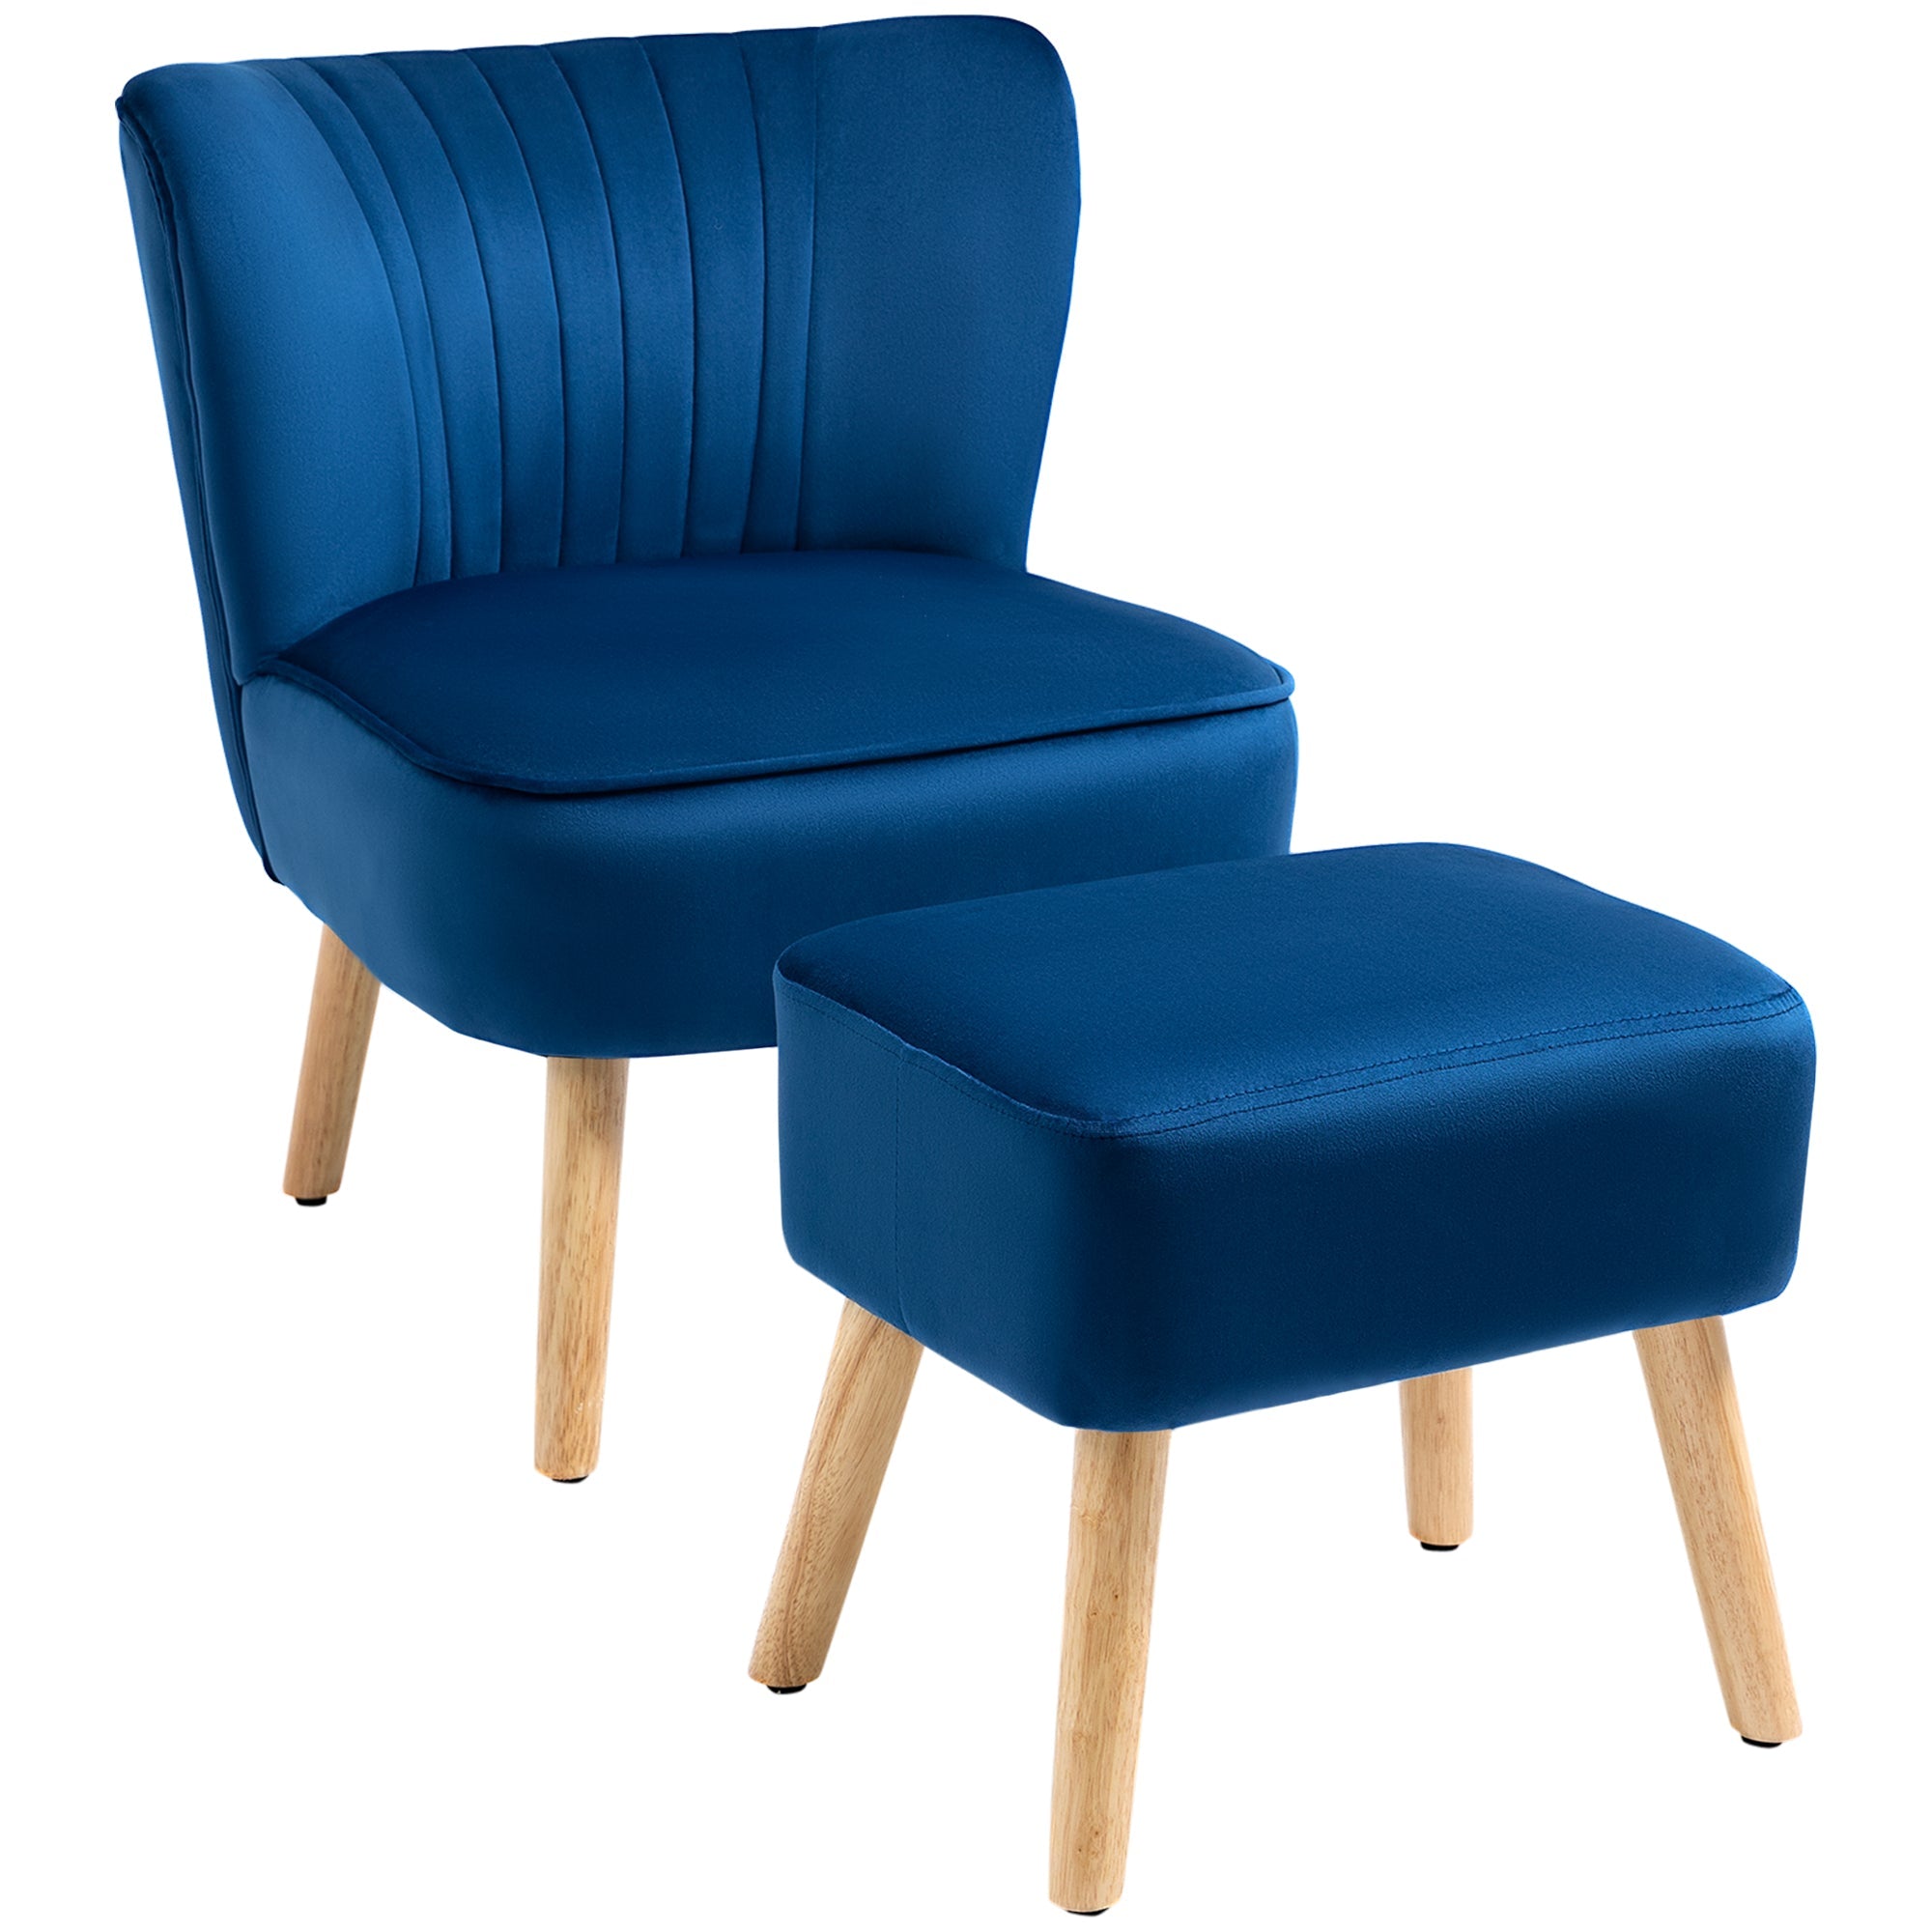 Velvet Accent Chair Occasional Tub Seat Padding Curved Back w/ Ottoman Wood Frame Legs Home Furniture, Dark Blue-0